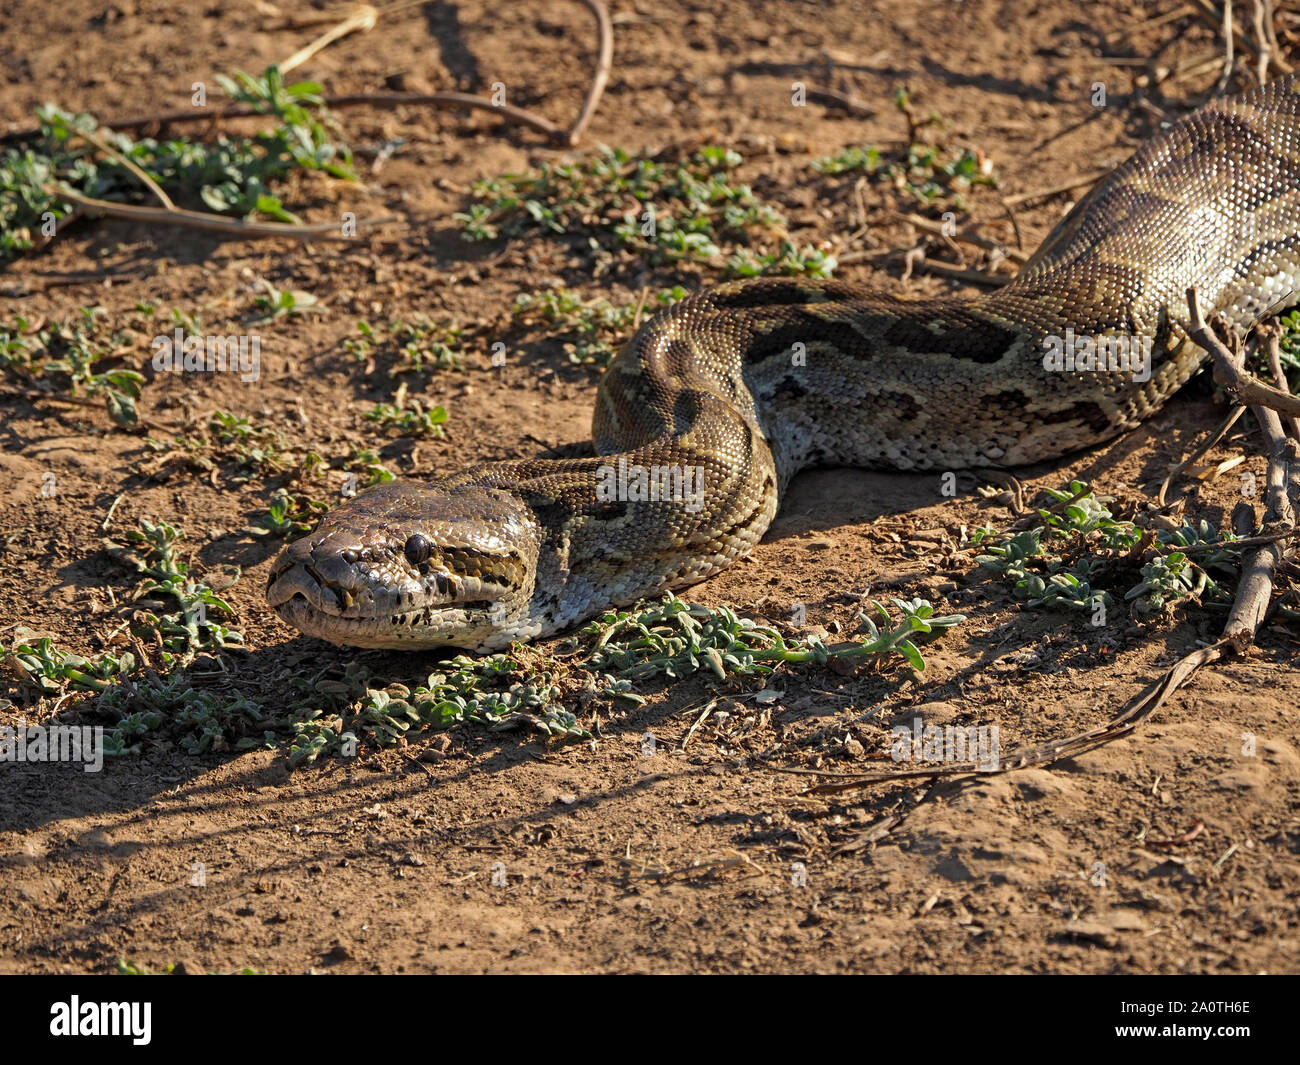 sinuous large African rock python (Python sebae) sunbathing on sandy ground to warm up in early morning sunshine in South Luangwa, Zambia,Africa Stock Photo